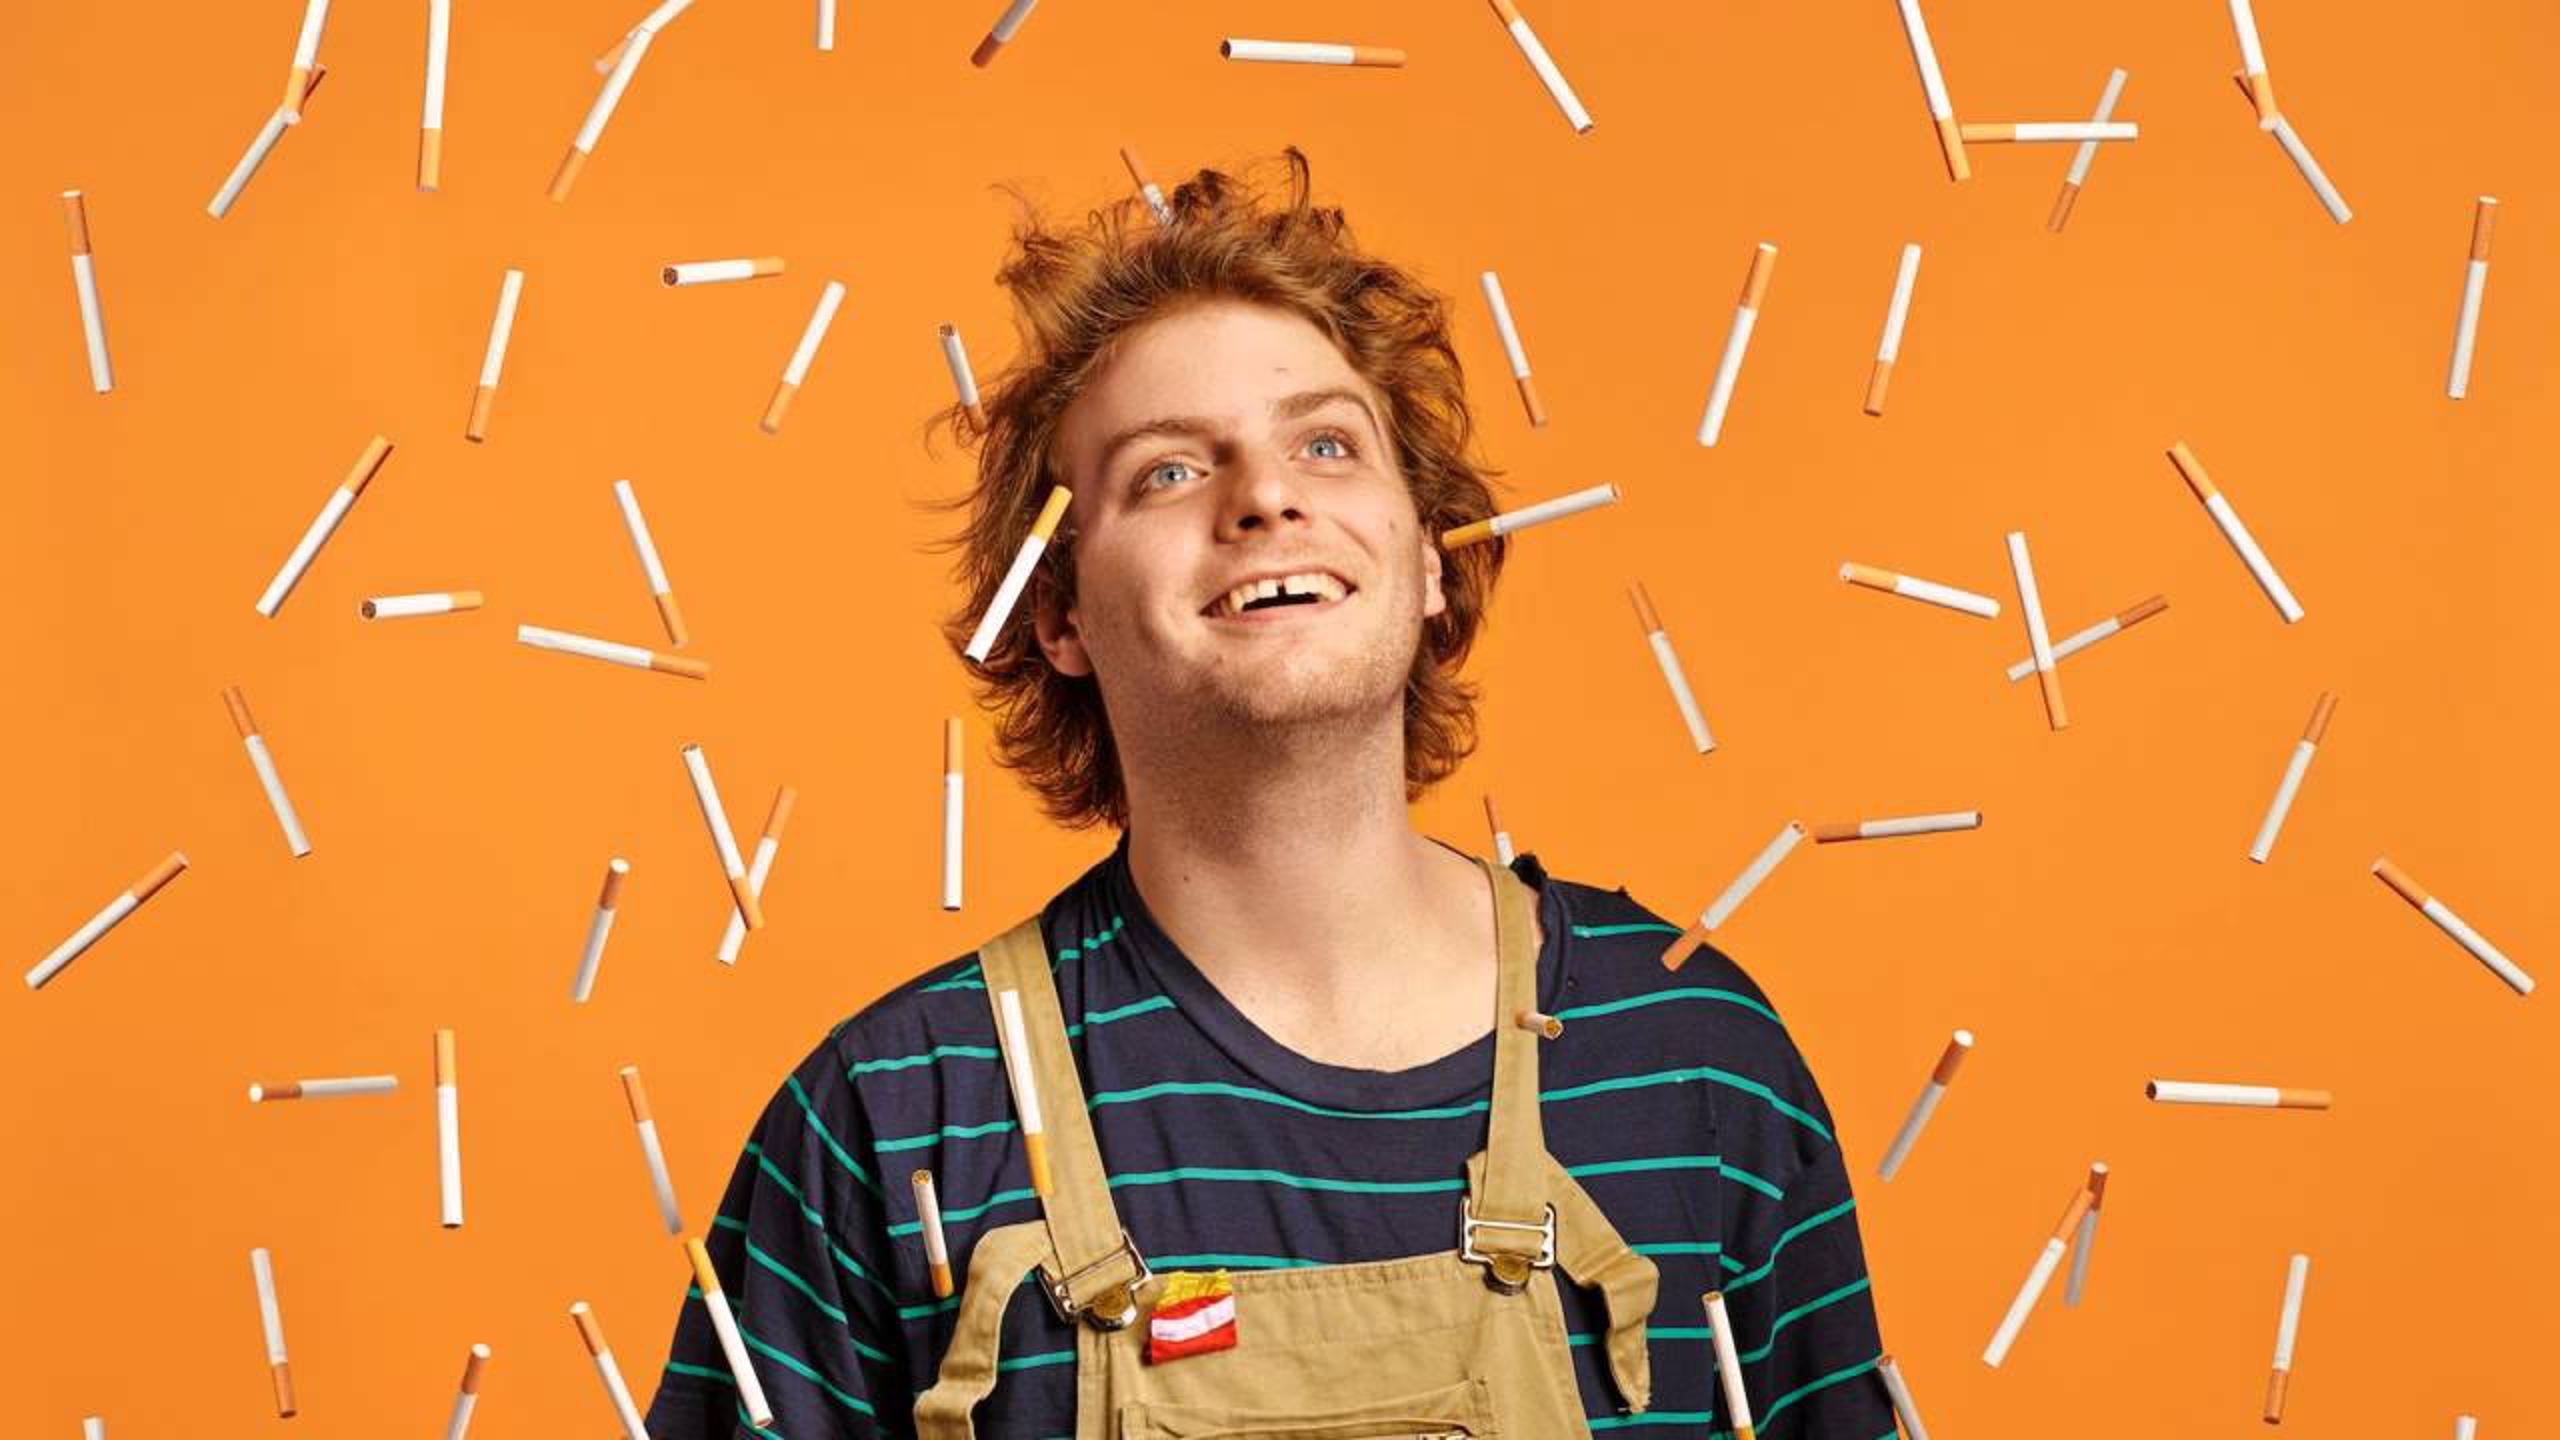 Mac Demarco tour dates 2022 2023. Mac Demarco tickets and concerts